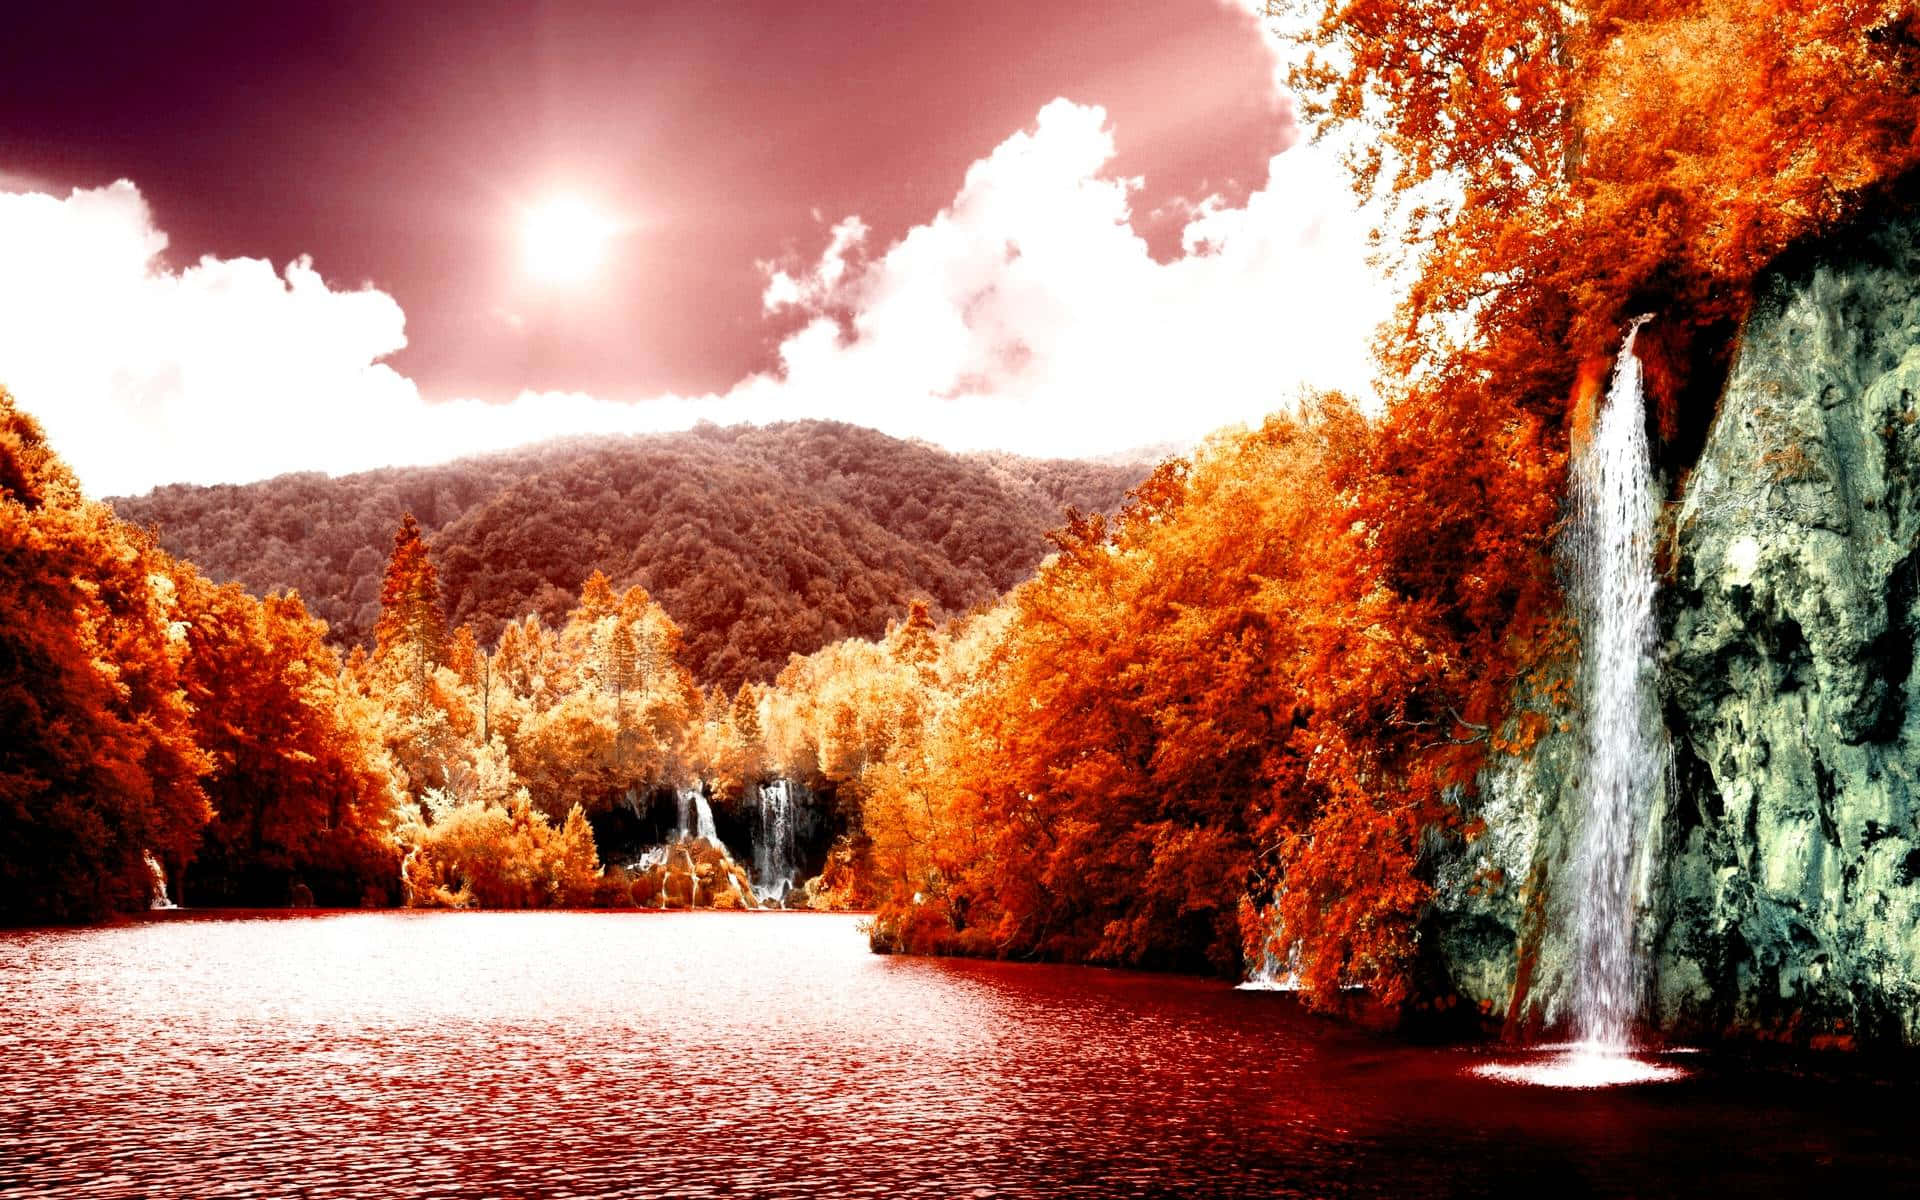 A picturesque view of the fall season Wallpaper